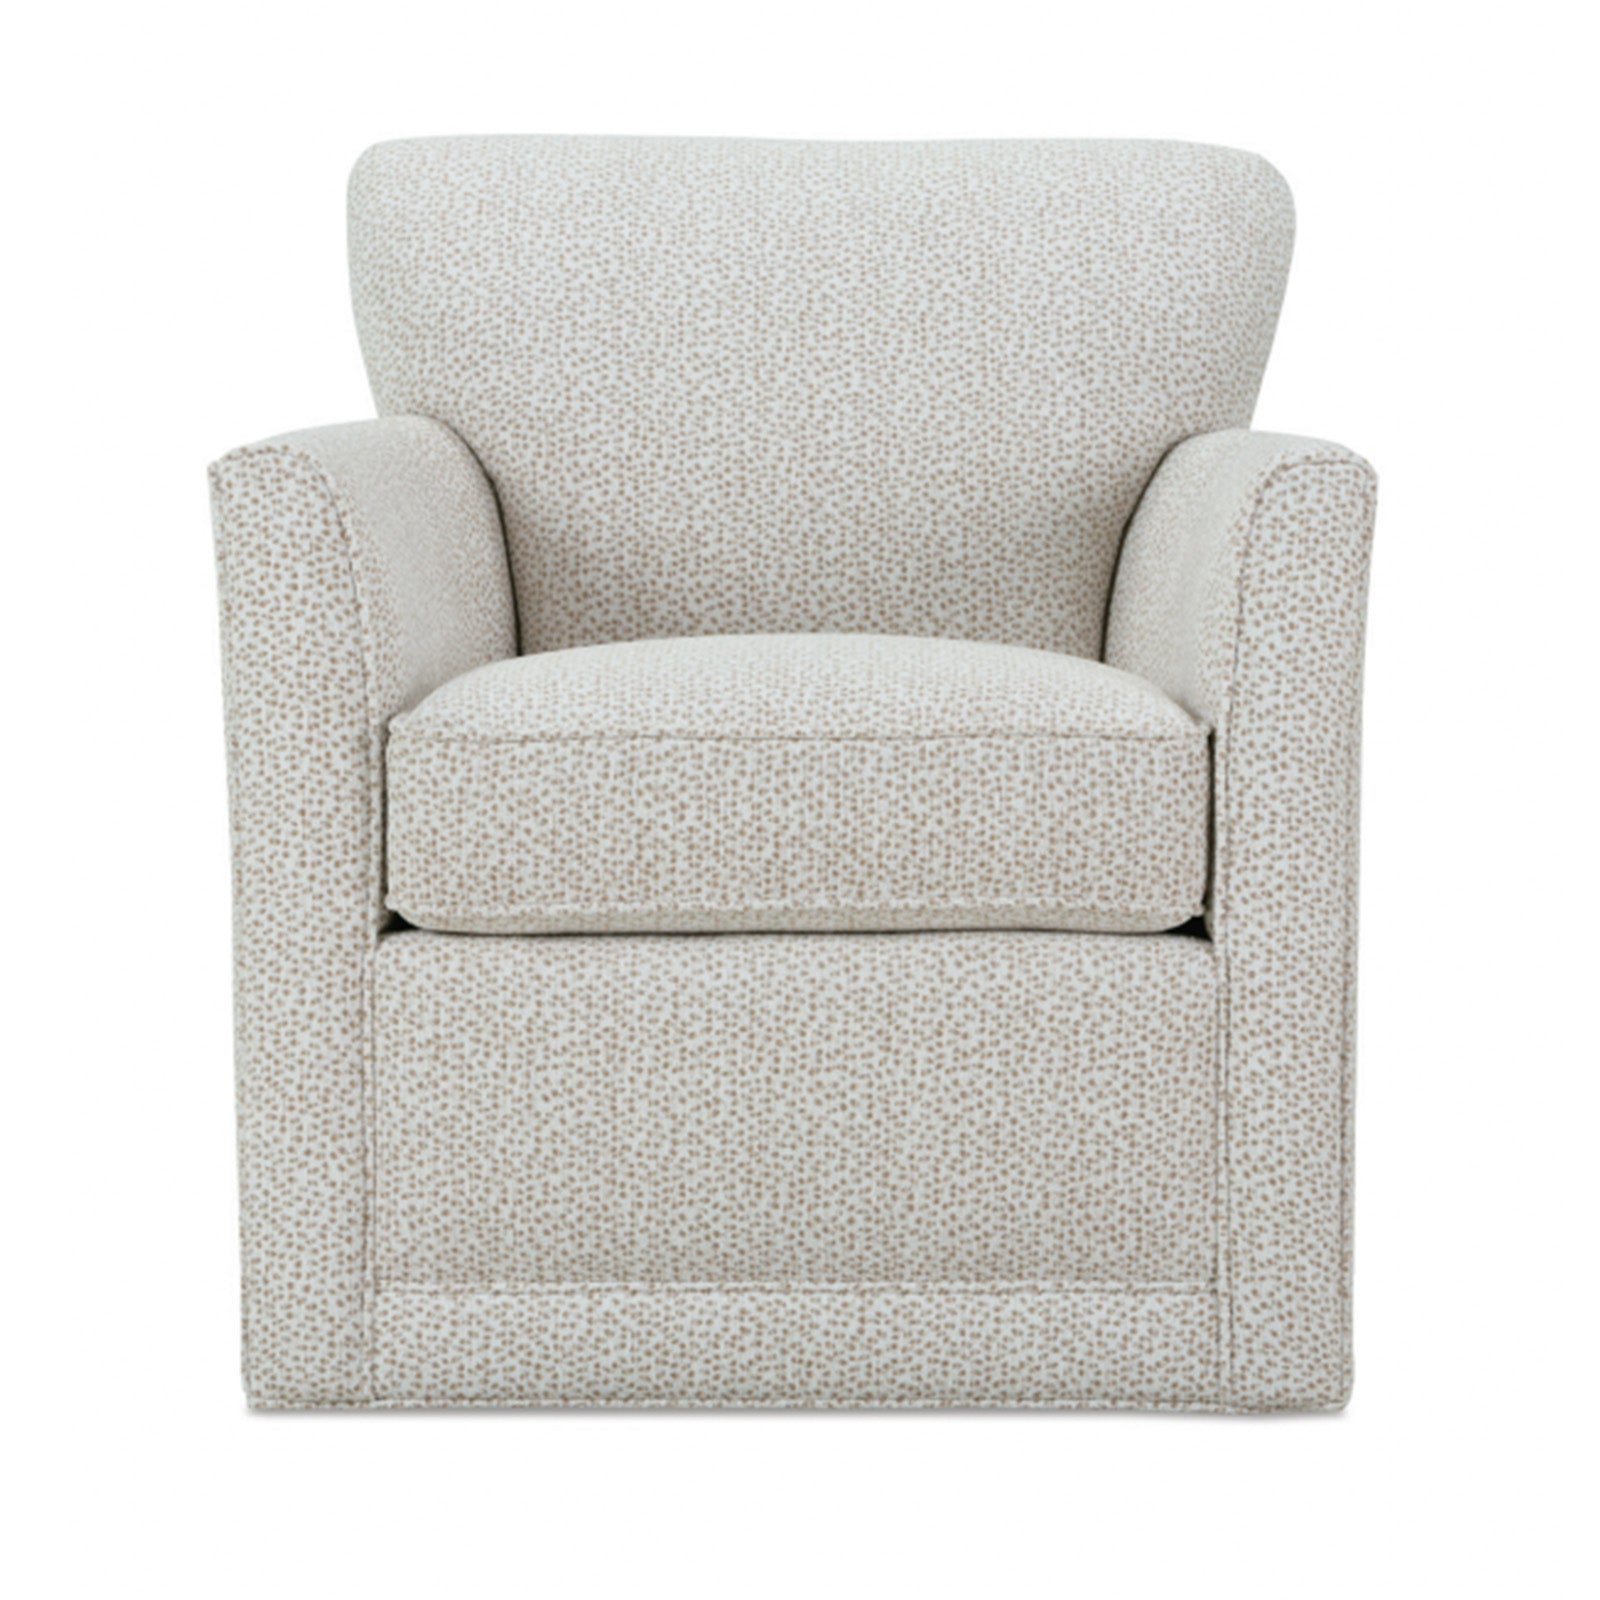 Times Square Swivel Chair- EXPRESS